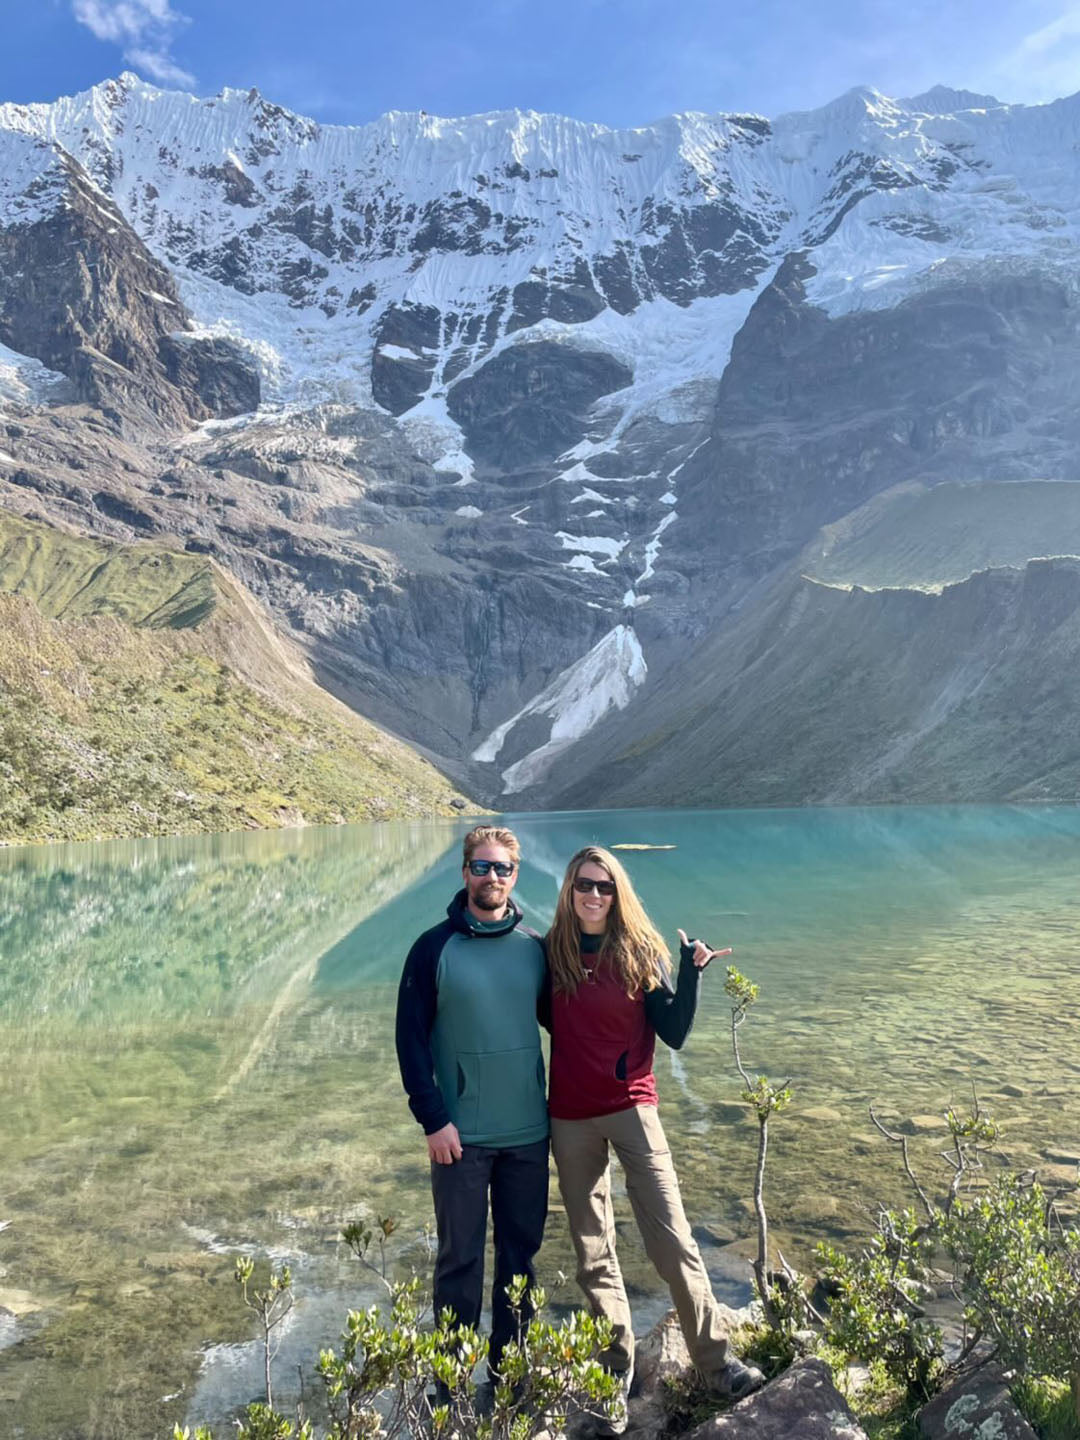 A woman wearing a Black and Classic Red custom Thuja Burrow fleece hoodie stands next to a man wearing a Black and Turquoise custom Thuja Burrow fleece hoodie in front of a crystal clear alpine lake with tall snow covered rocky mountains behind it.